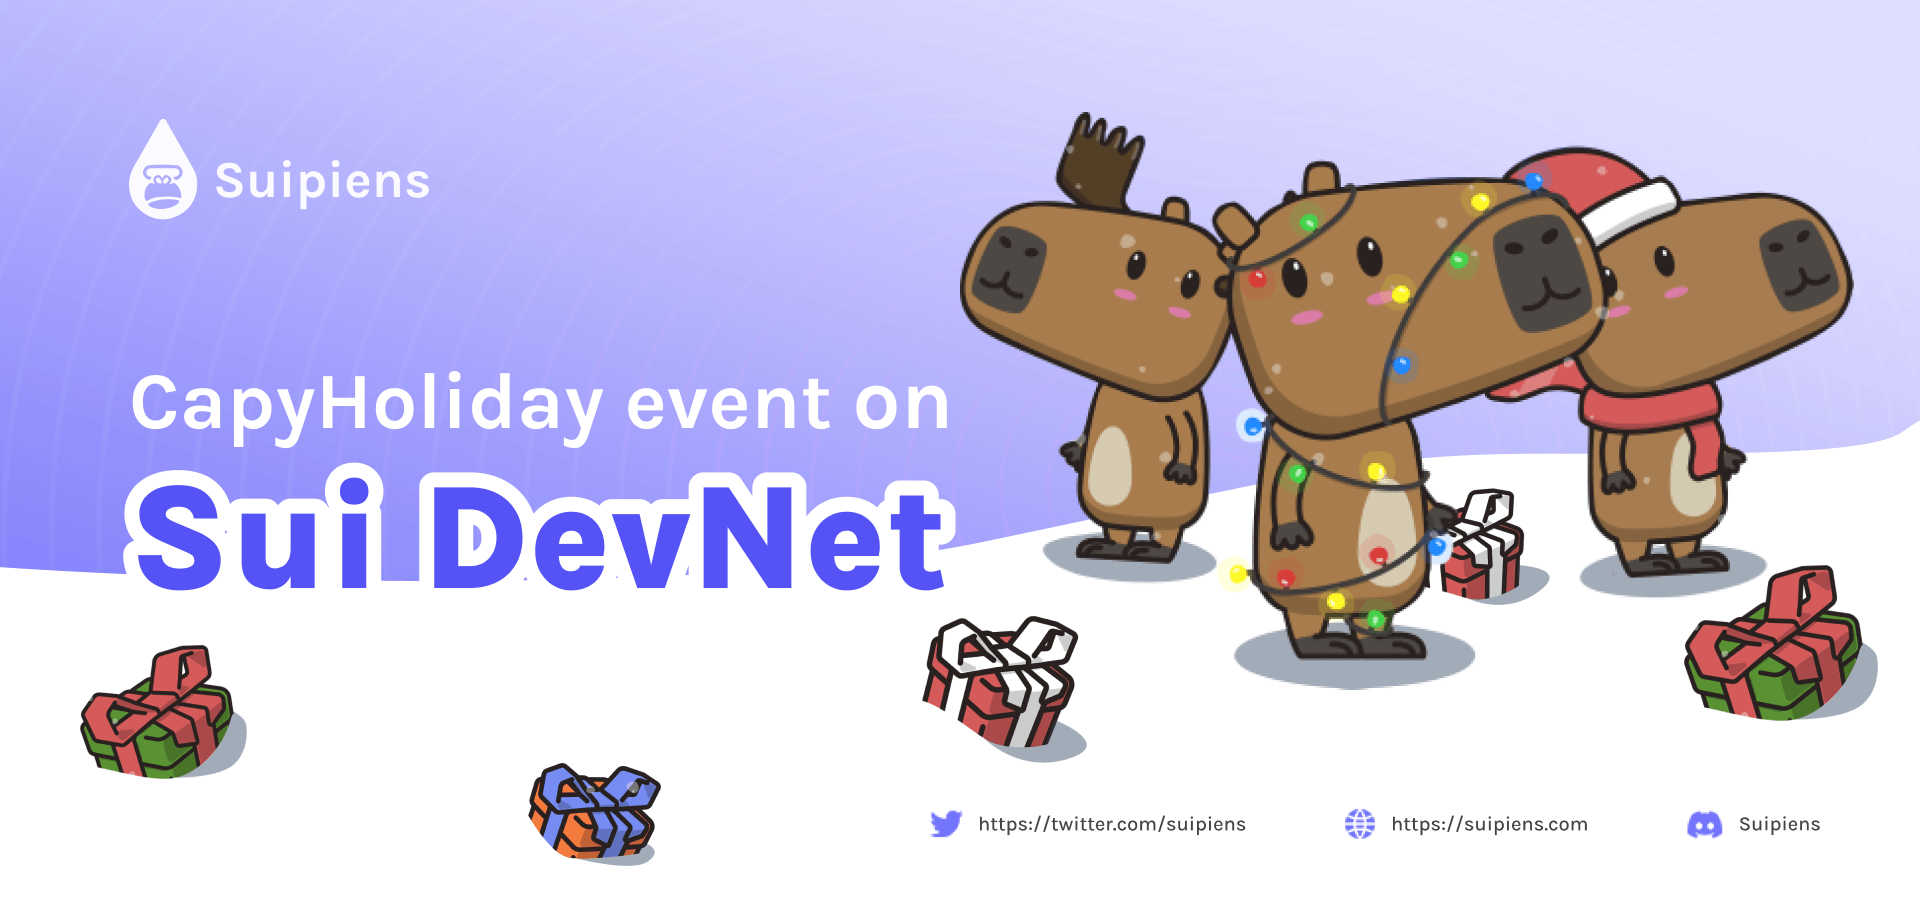 CapyHoliday event will take place on Sui Devnet!